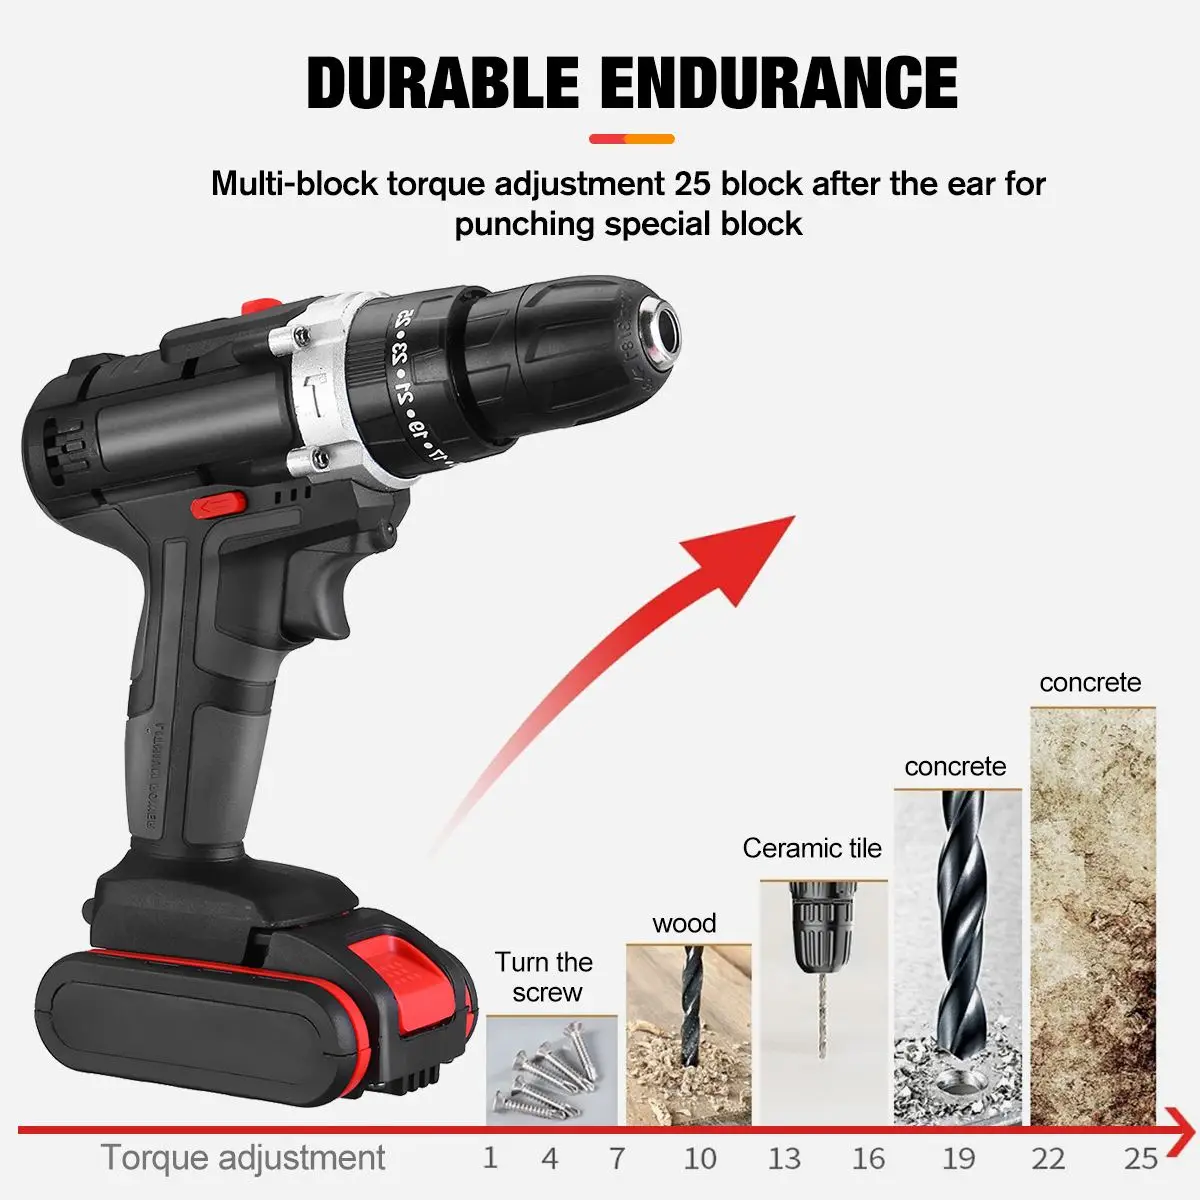 3-Speed Electric Drill Cordless Screwdriver Impact Drill 88V Max Lithium  Battery Mini Drill Cordless Screwdriver Power Tools